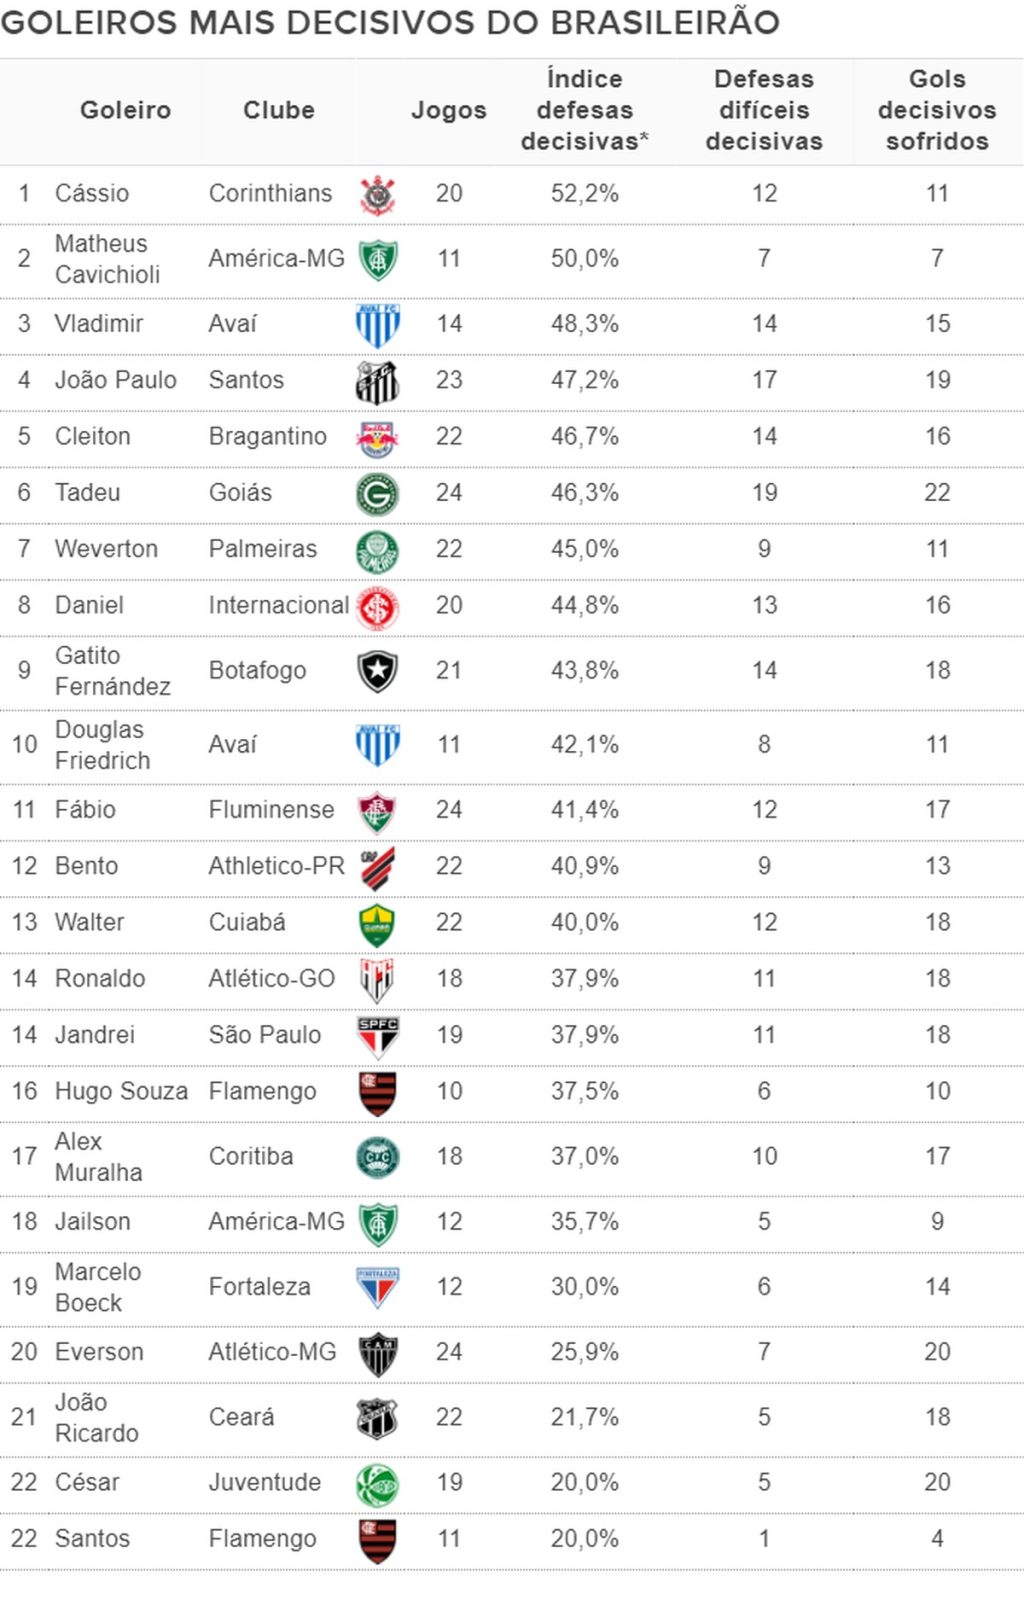 The ranking shows the most decisive goalkeepers in Brazil and who is the biggest rival to the leaders |  Statistical spy